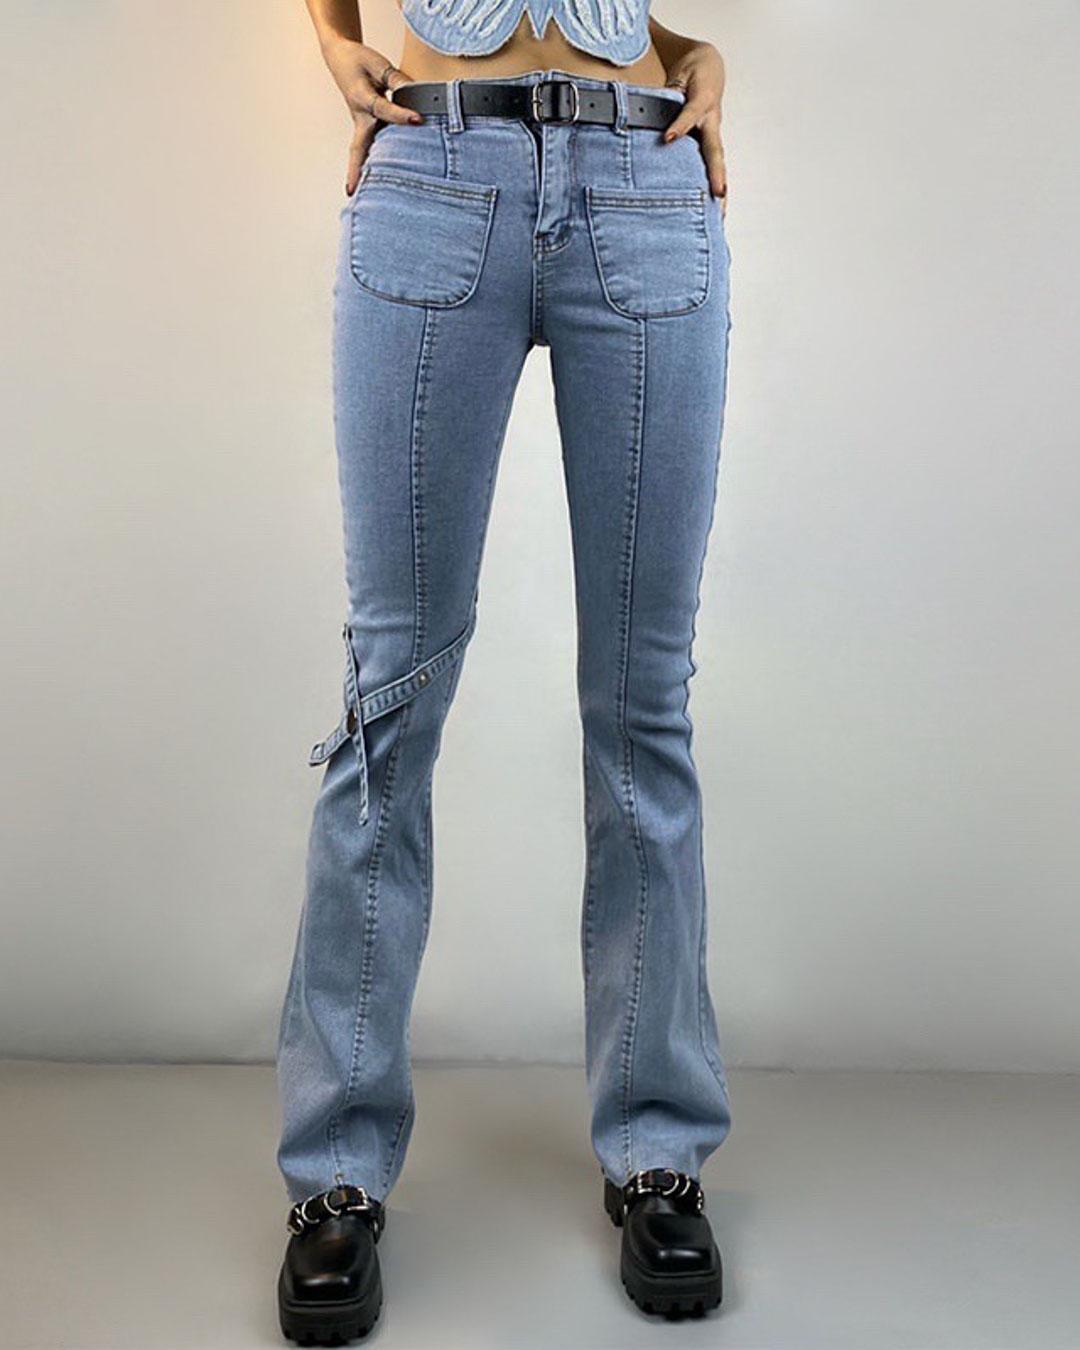 Casual Pocket Lace-Up Flare Denims Jeans